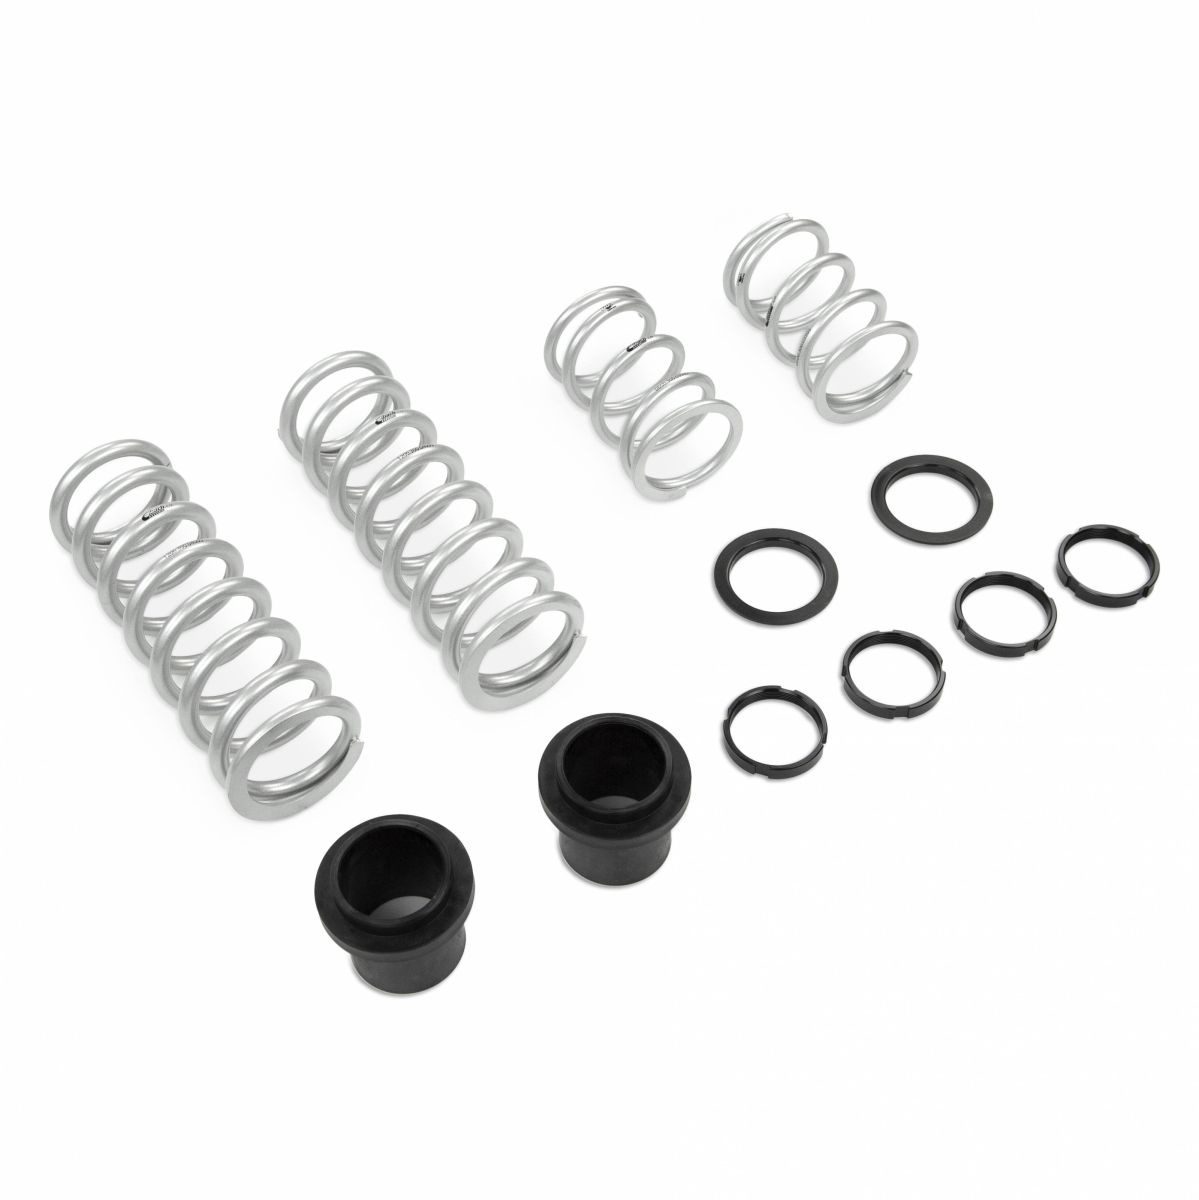 Cognito Motorsports - Cognito Dual Rate Front Spring Kit For Fox 2.5 Inch Shocks On 16-19 Polaris XP